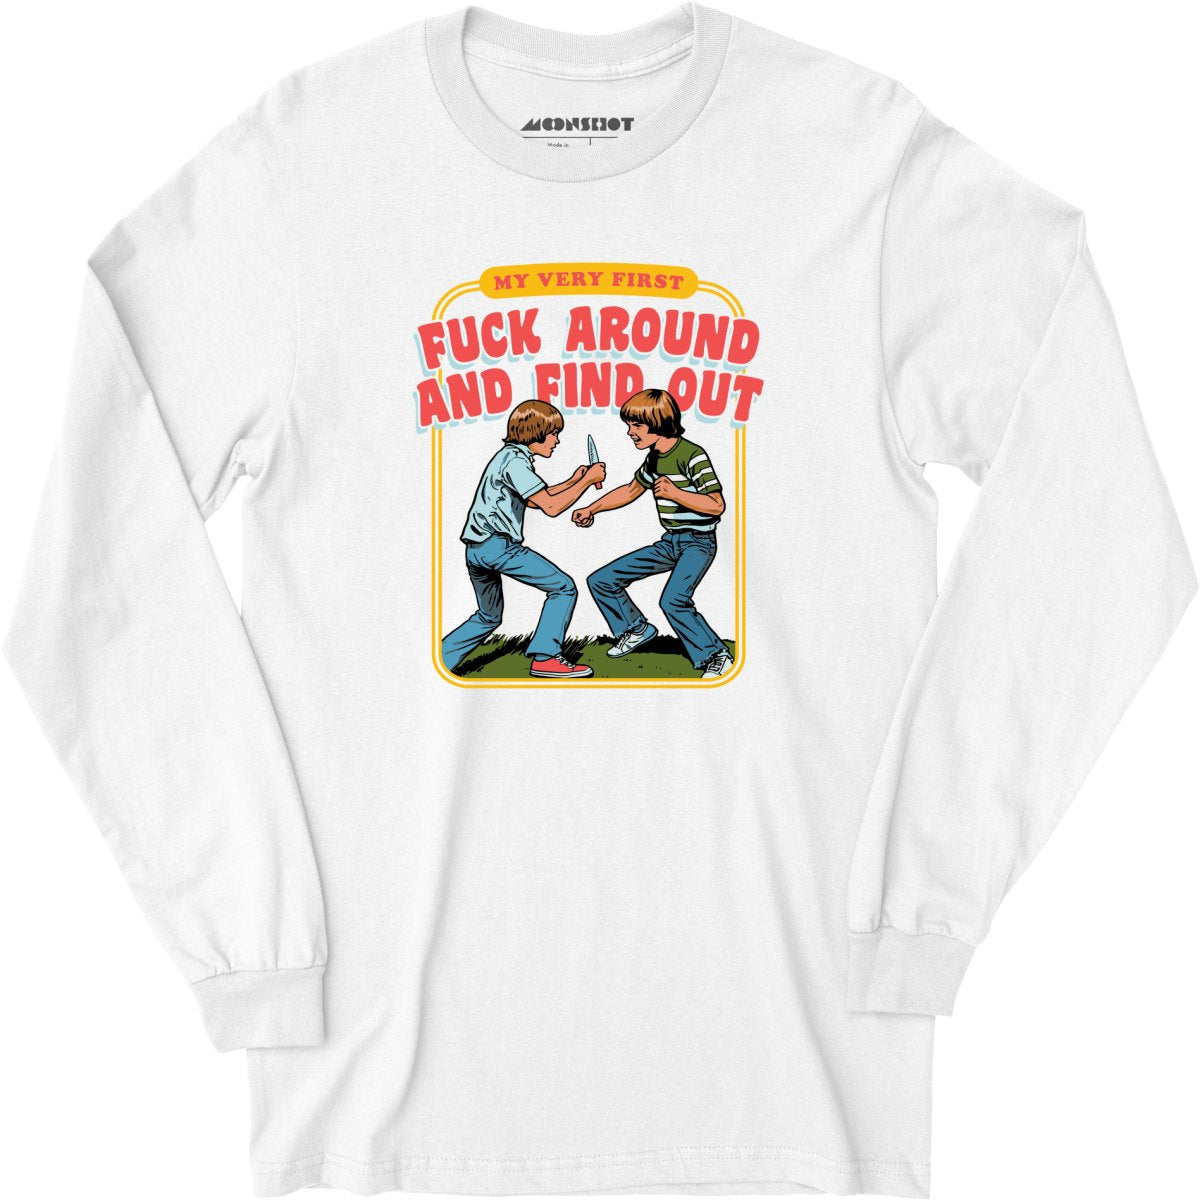 My Very First Fuck Around and Find Out - Long Sleeve T-Shirt